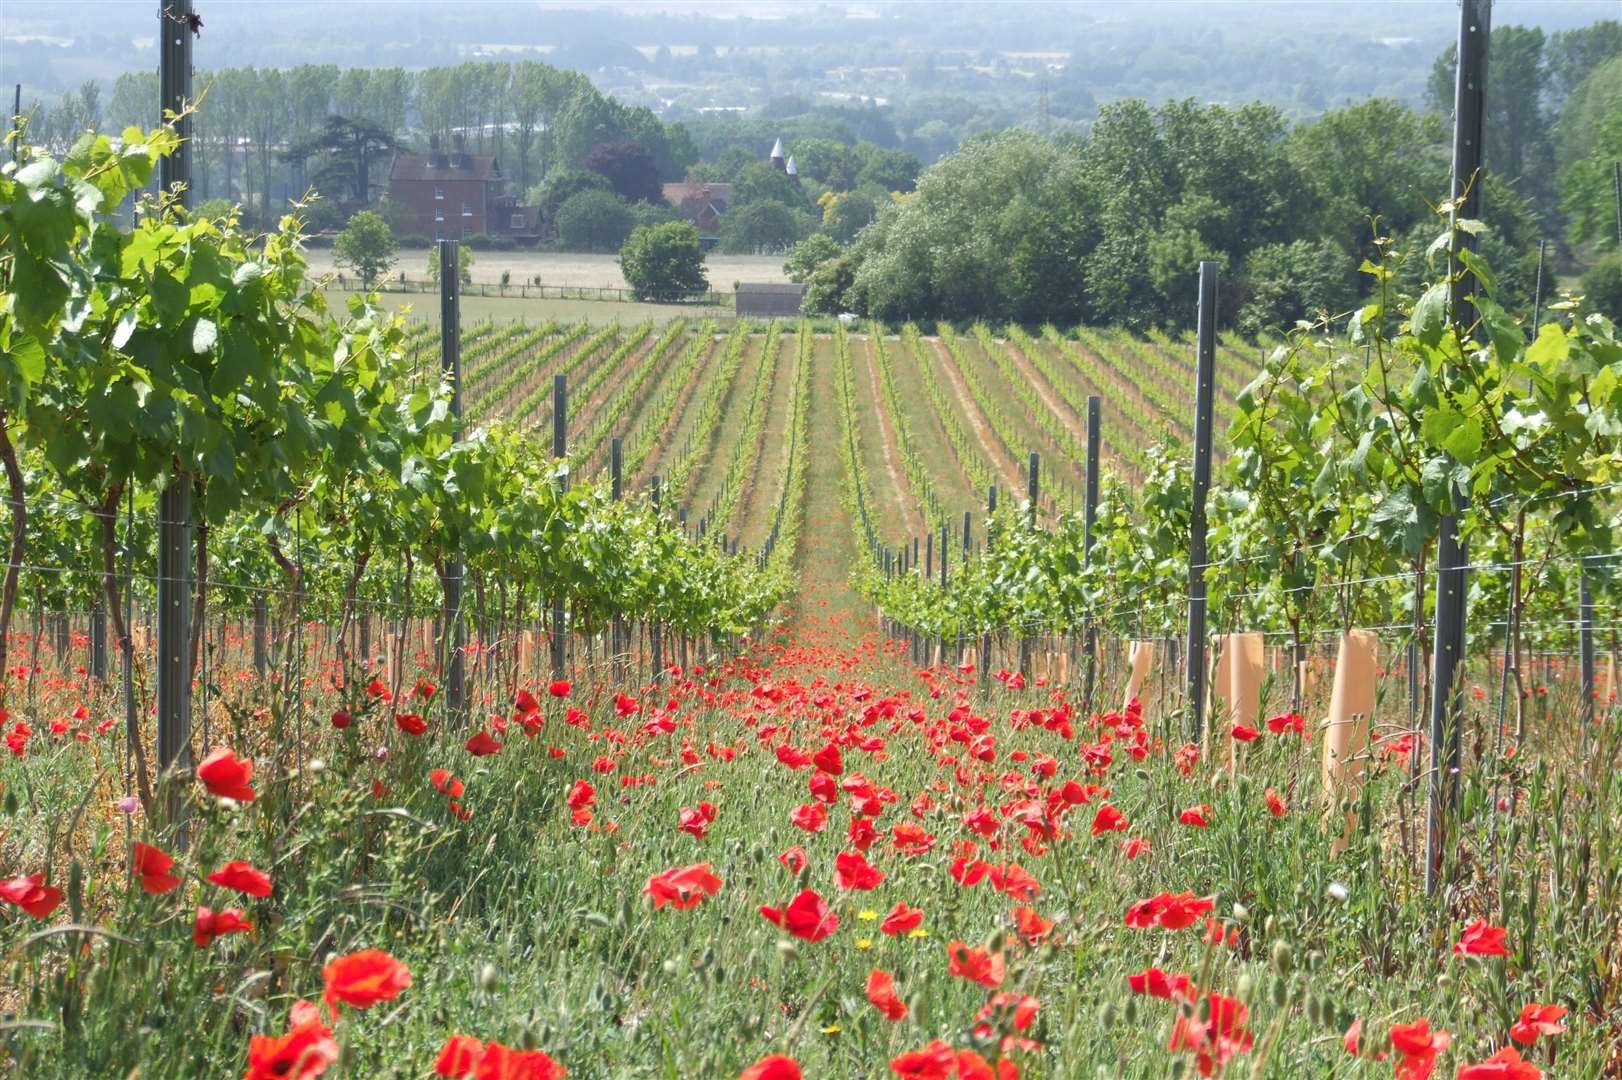 Chapel Down's Kits Coty vineyard - which neighbours the land it hopes to start growing more vines on